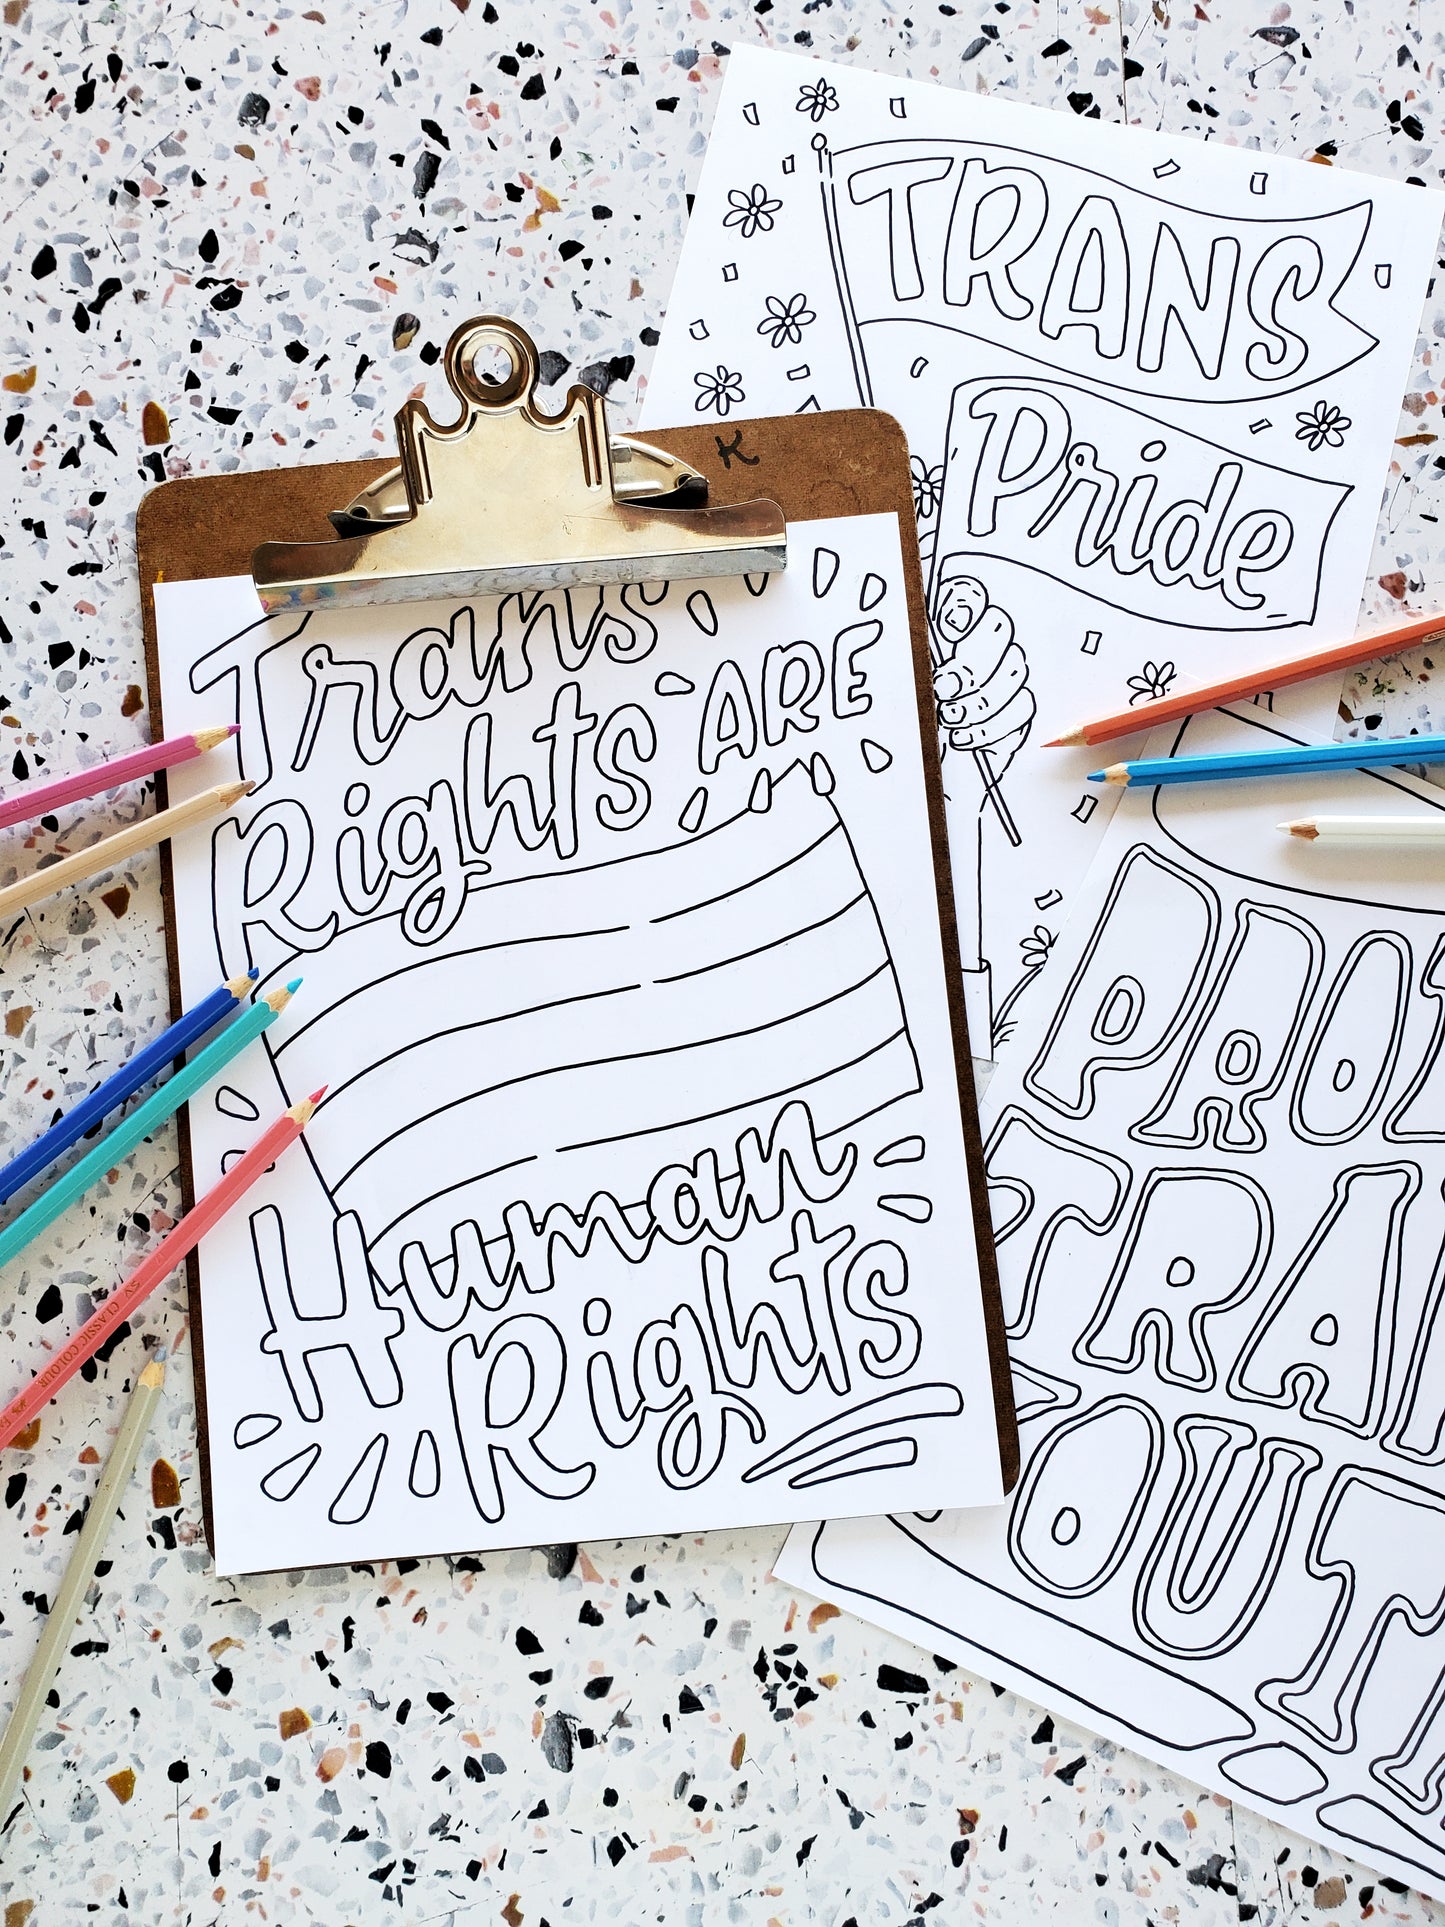 Trans Rights Protest Poster Coloring Pages - Trans Rights Fundraiser